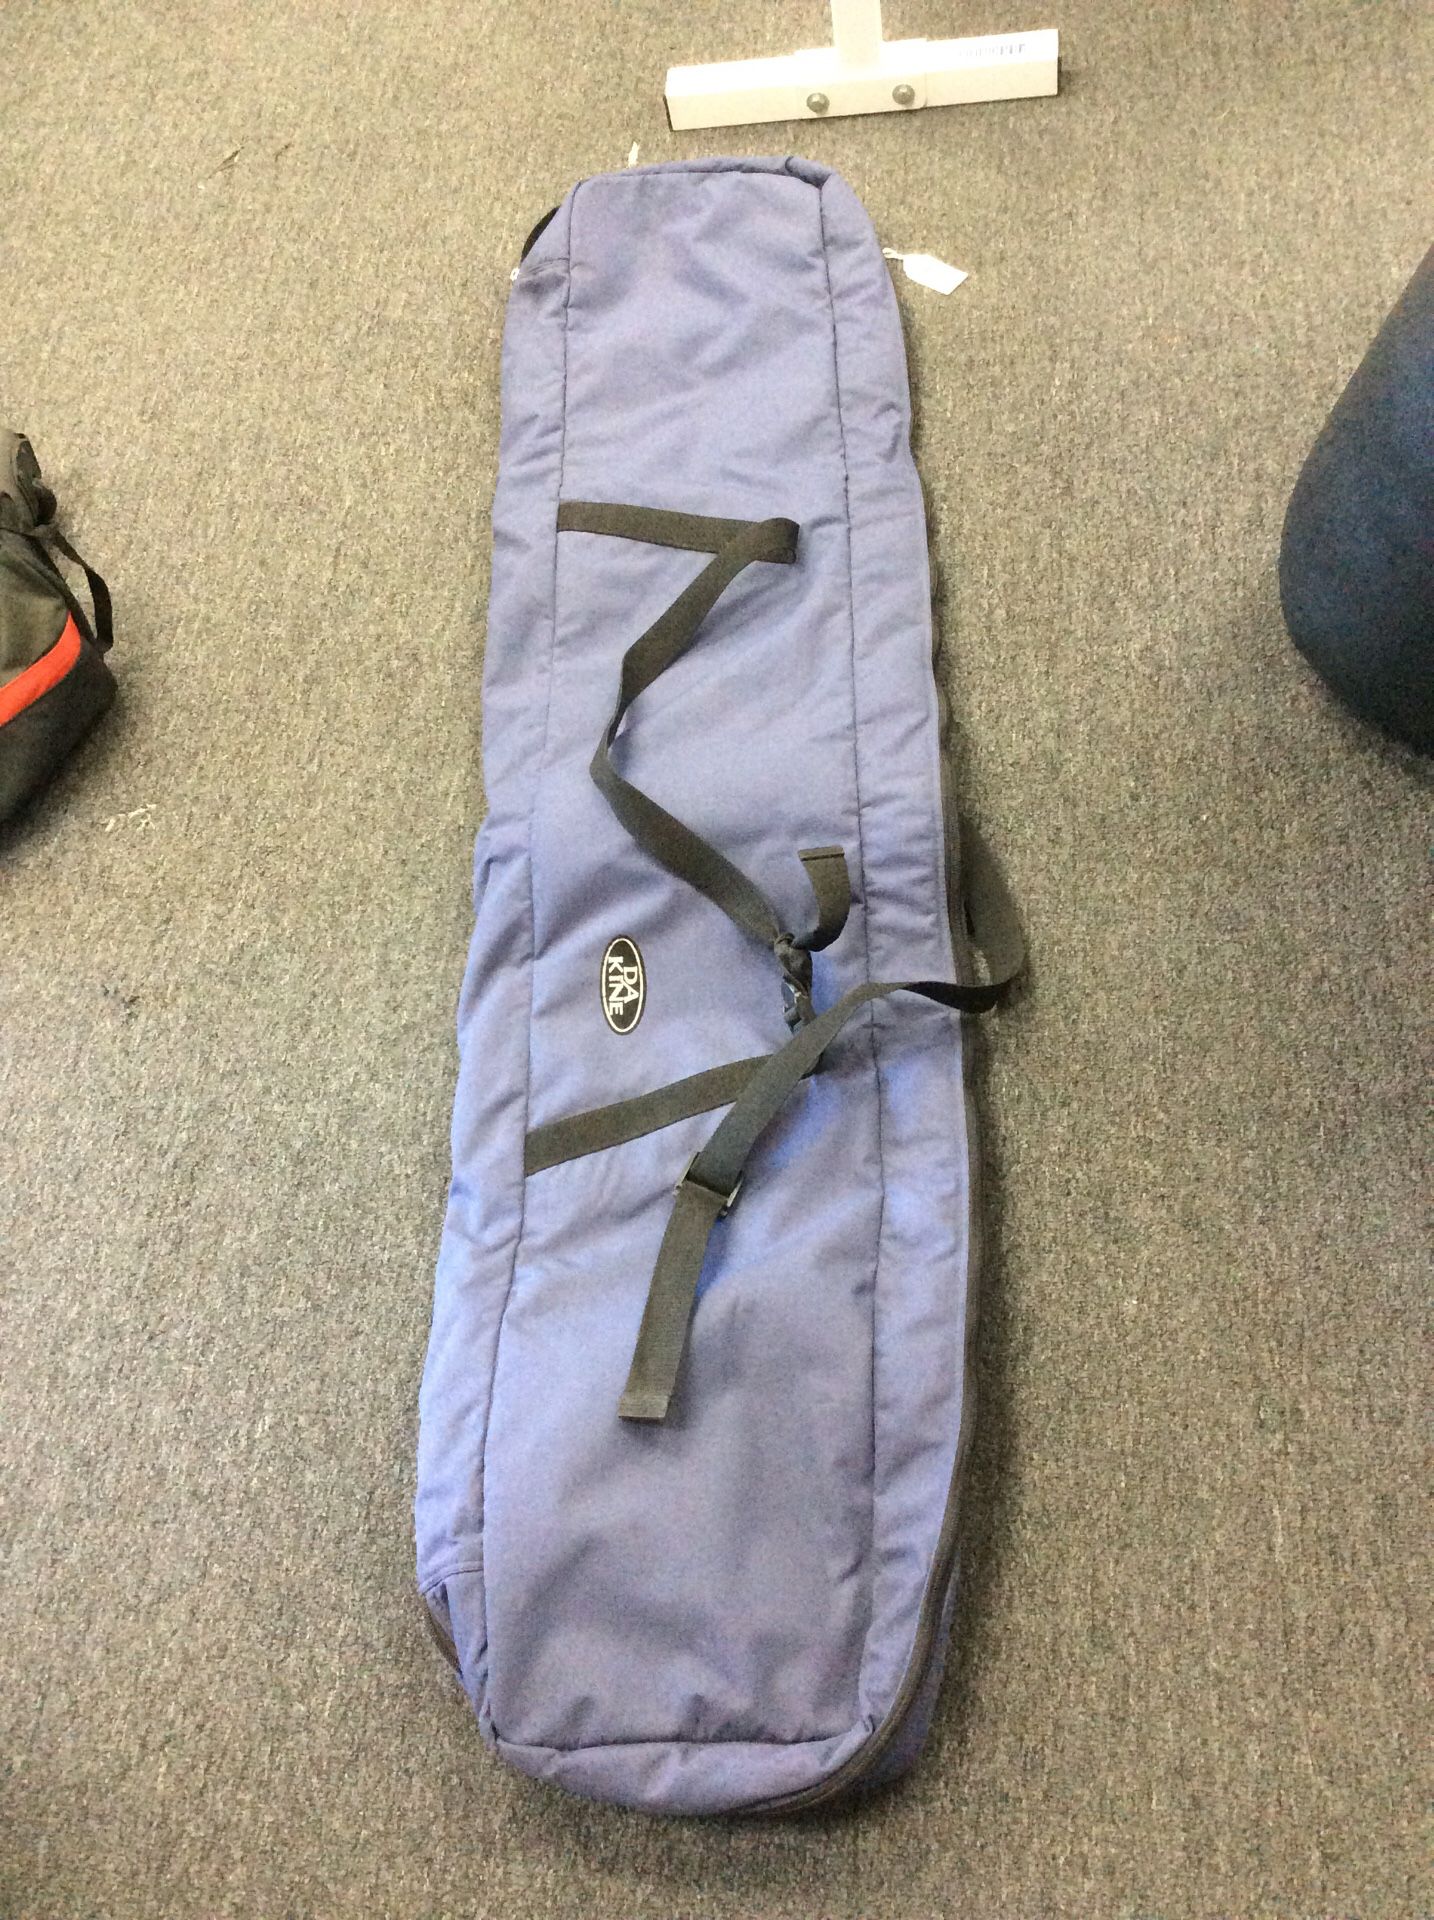 DA KINE Padded Snowboard Bag as is - Pick up only